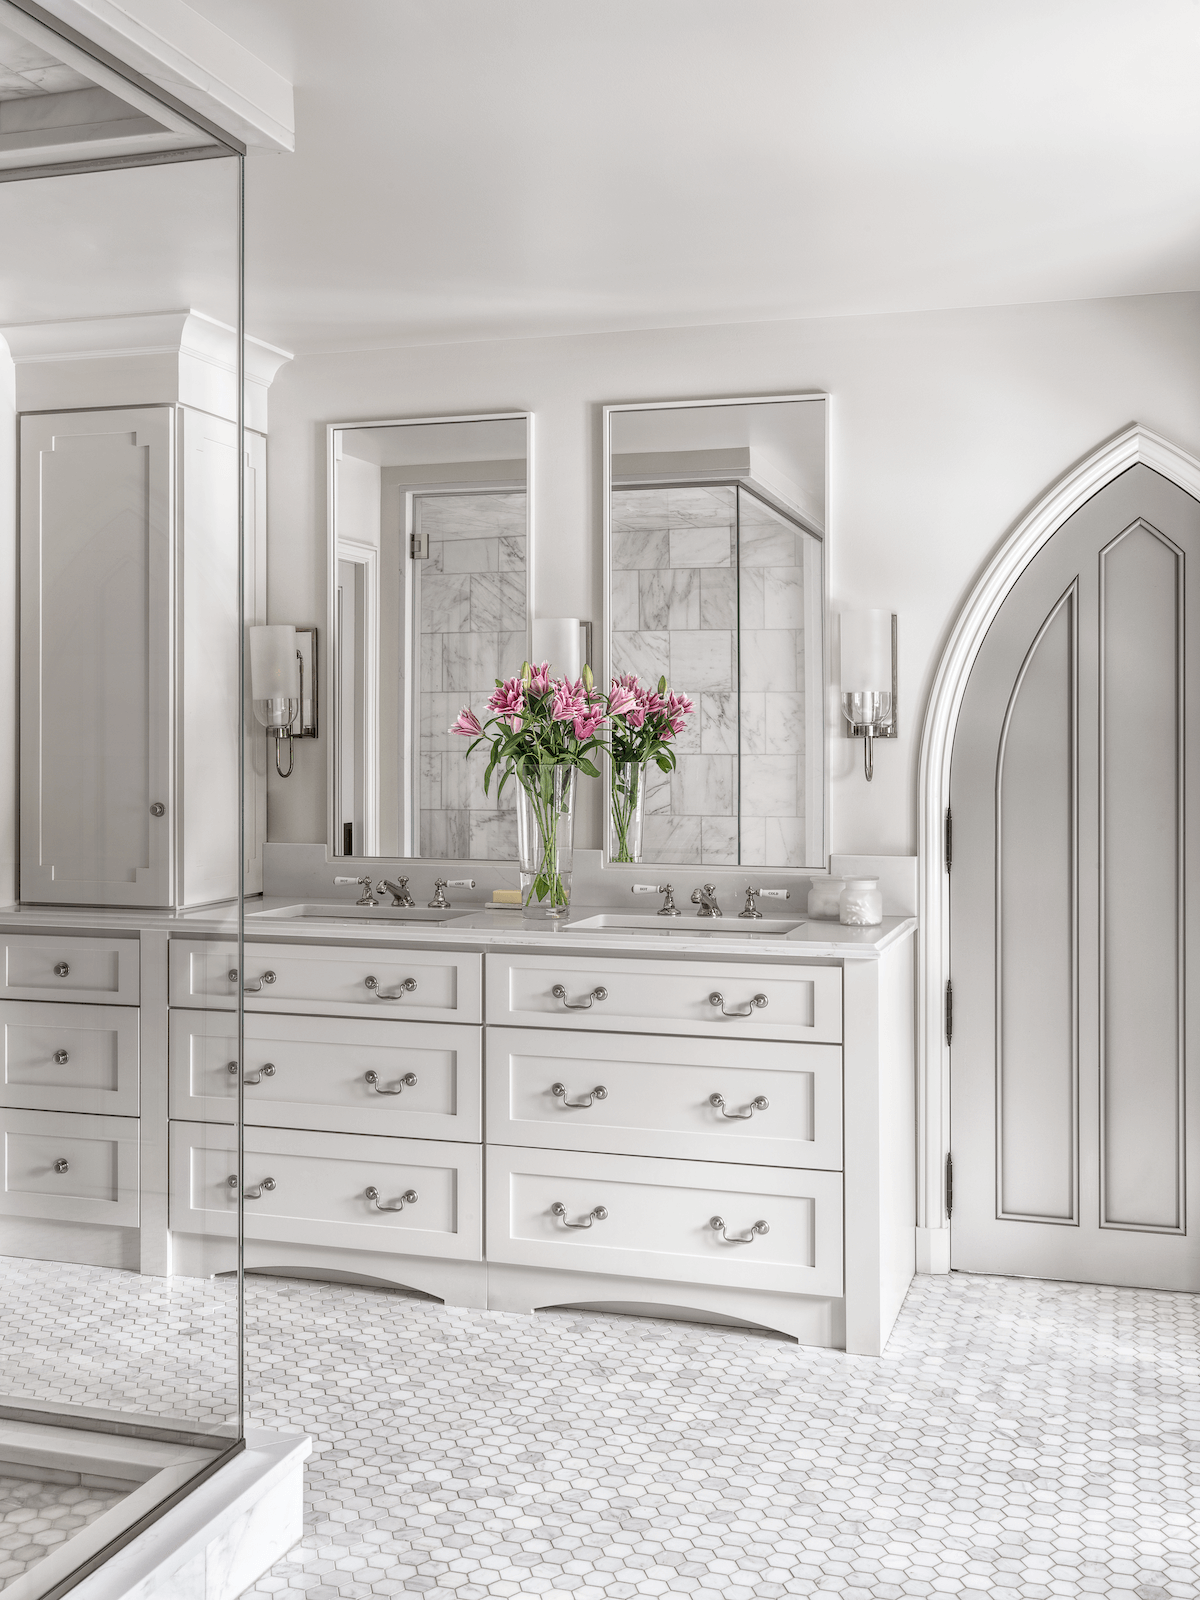 Furniture-style vanity in a master bathroom by Mitchell Wall featuring Beck/Allen Cabinetry